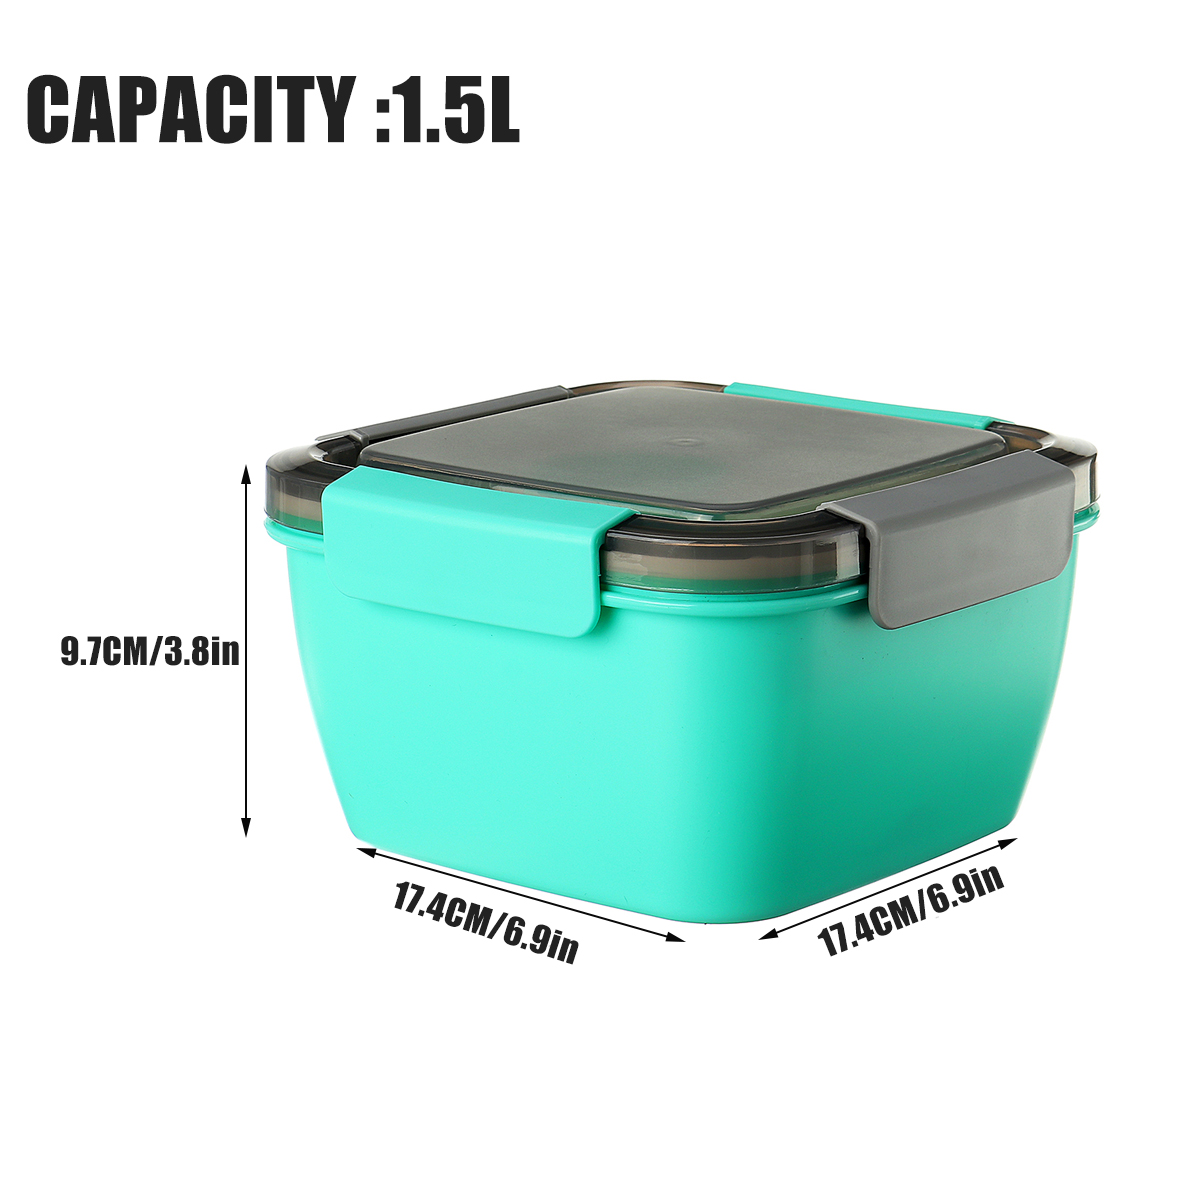 Portable-Sealed-Divider-Bento-Lunch-Box-Container-Leak-Proof-Food-Stroage-Case-Camping-BBQ-Tableware-1565575-6